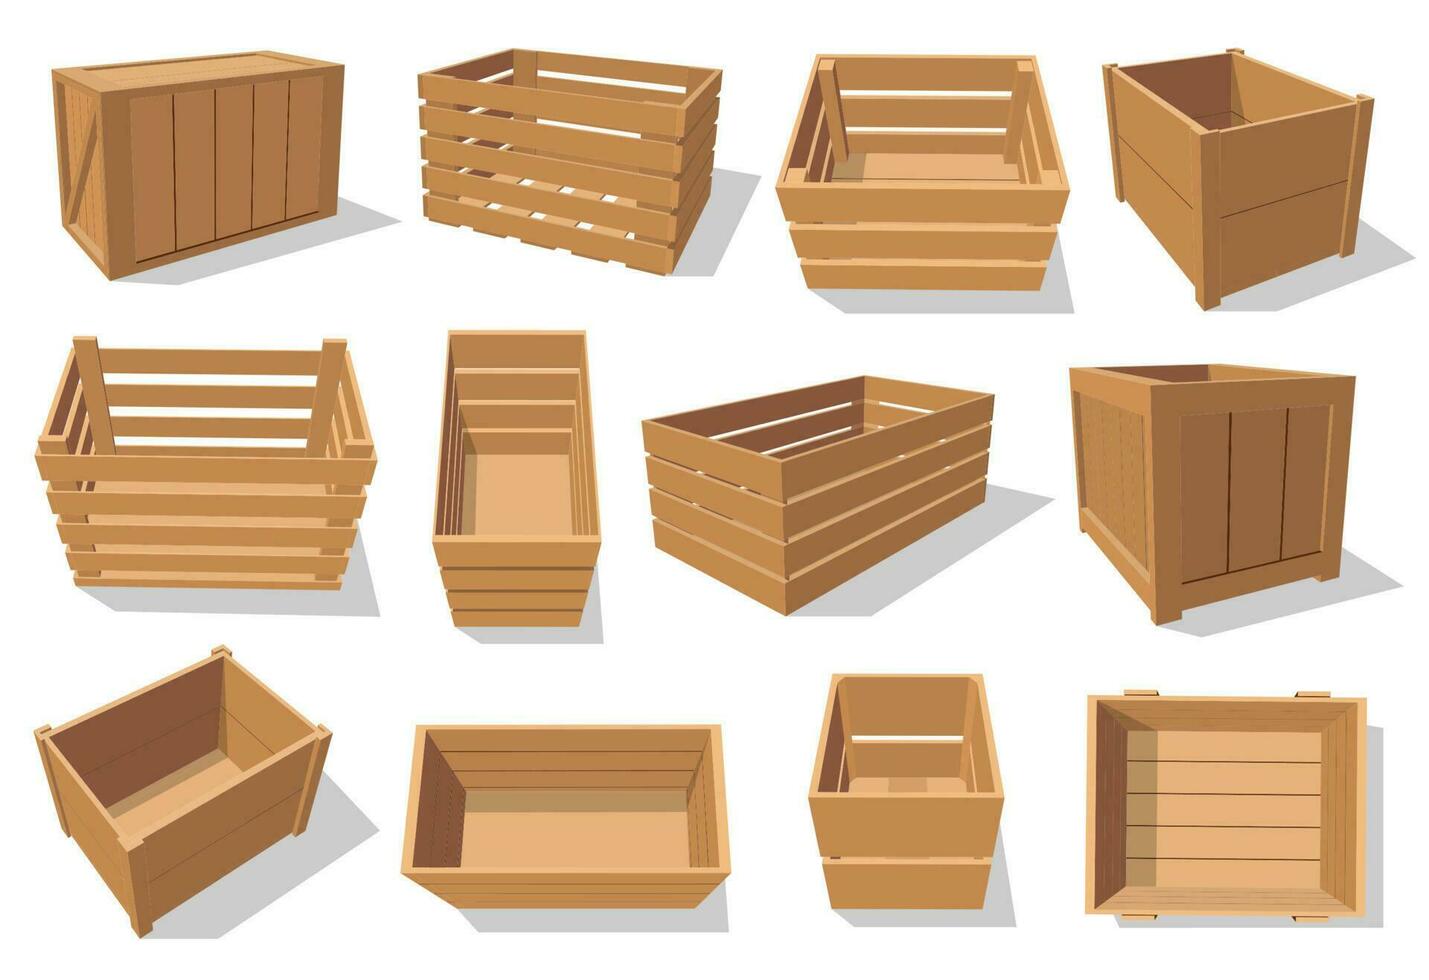 Wooden crate, box and wood containers vector